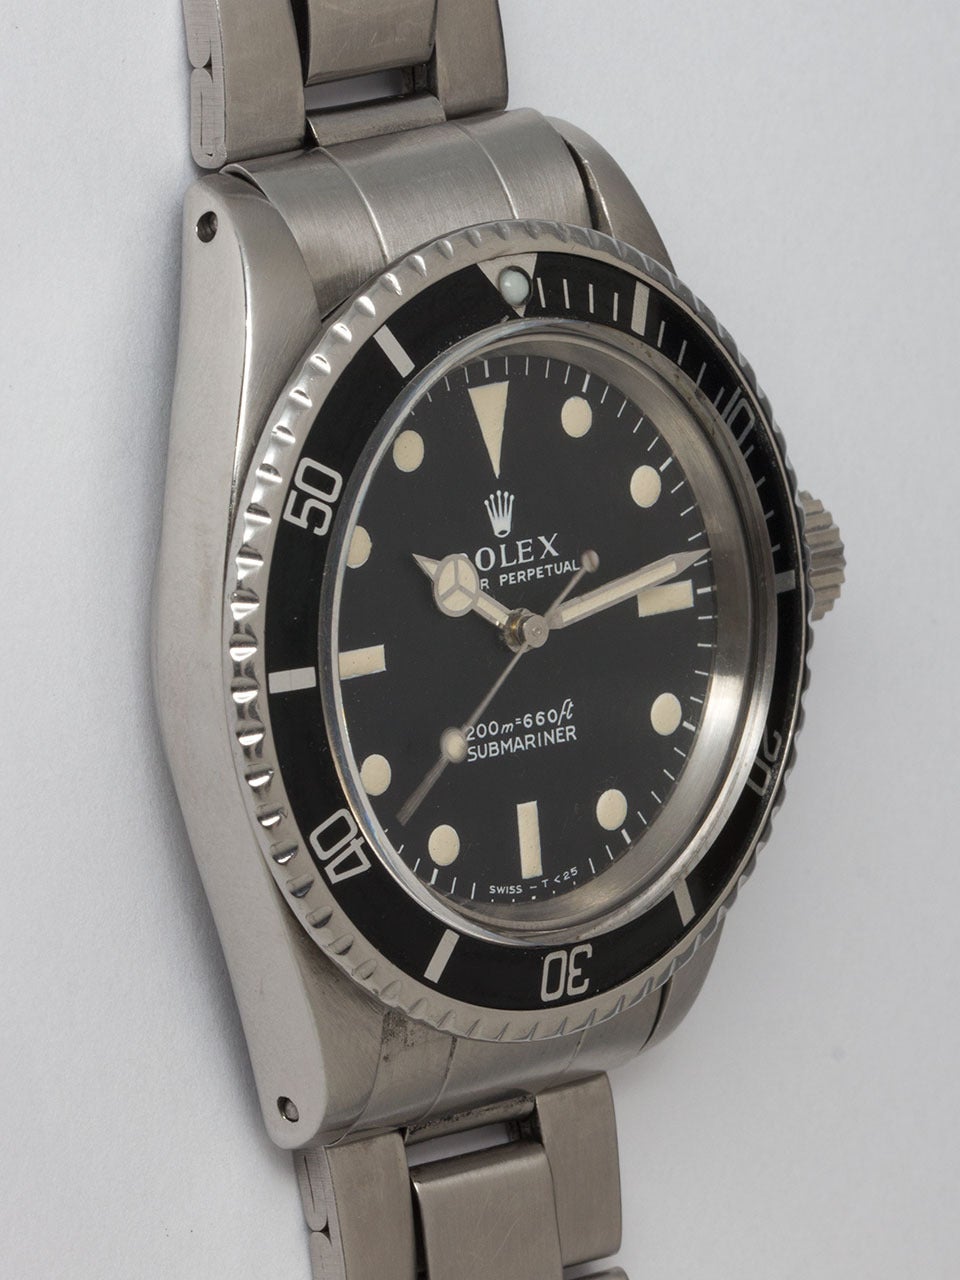 Rolex Stainless Steel Submariner Wristwatch ref 5513 serial #1.6 million circa 1967. 40mm diameter case with bi-directional elapsed time bezel and acrylic dome crystal. Original matte black 